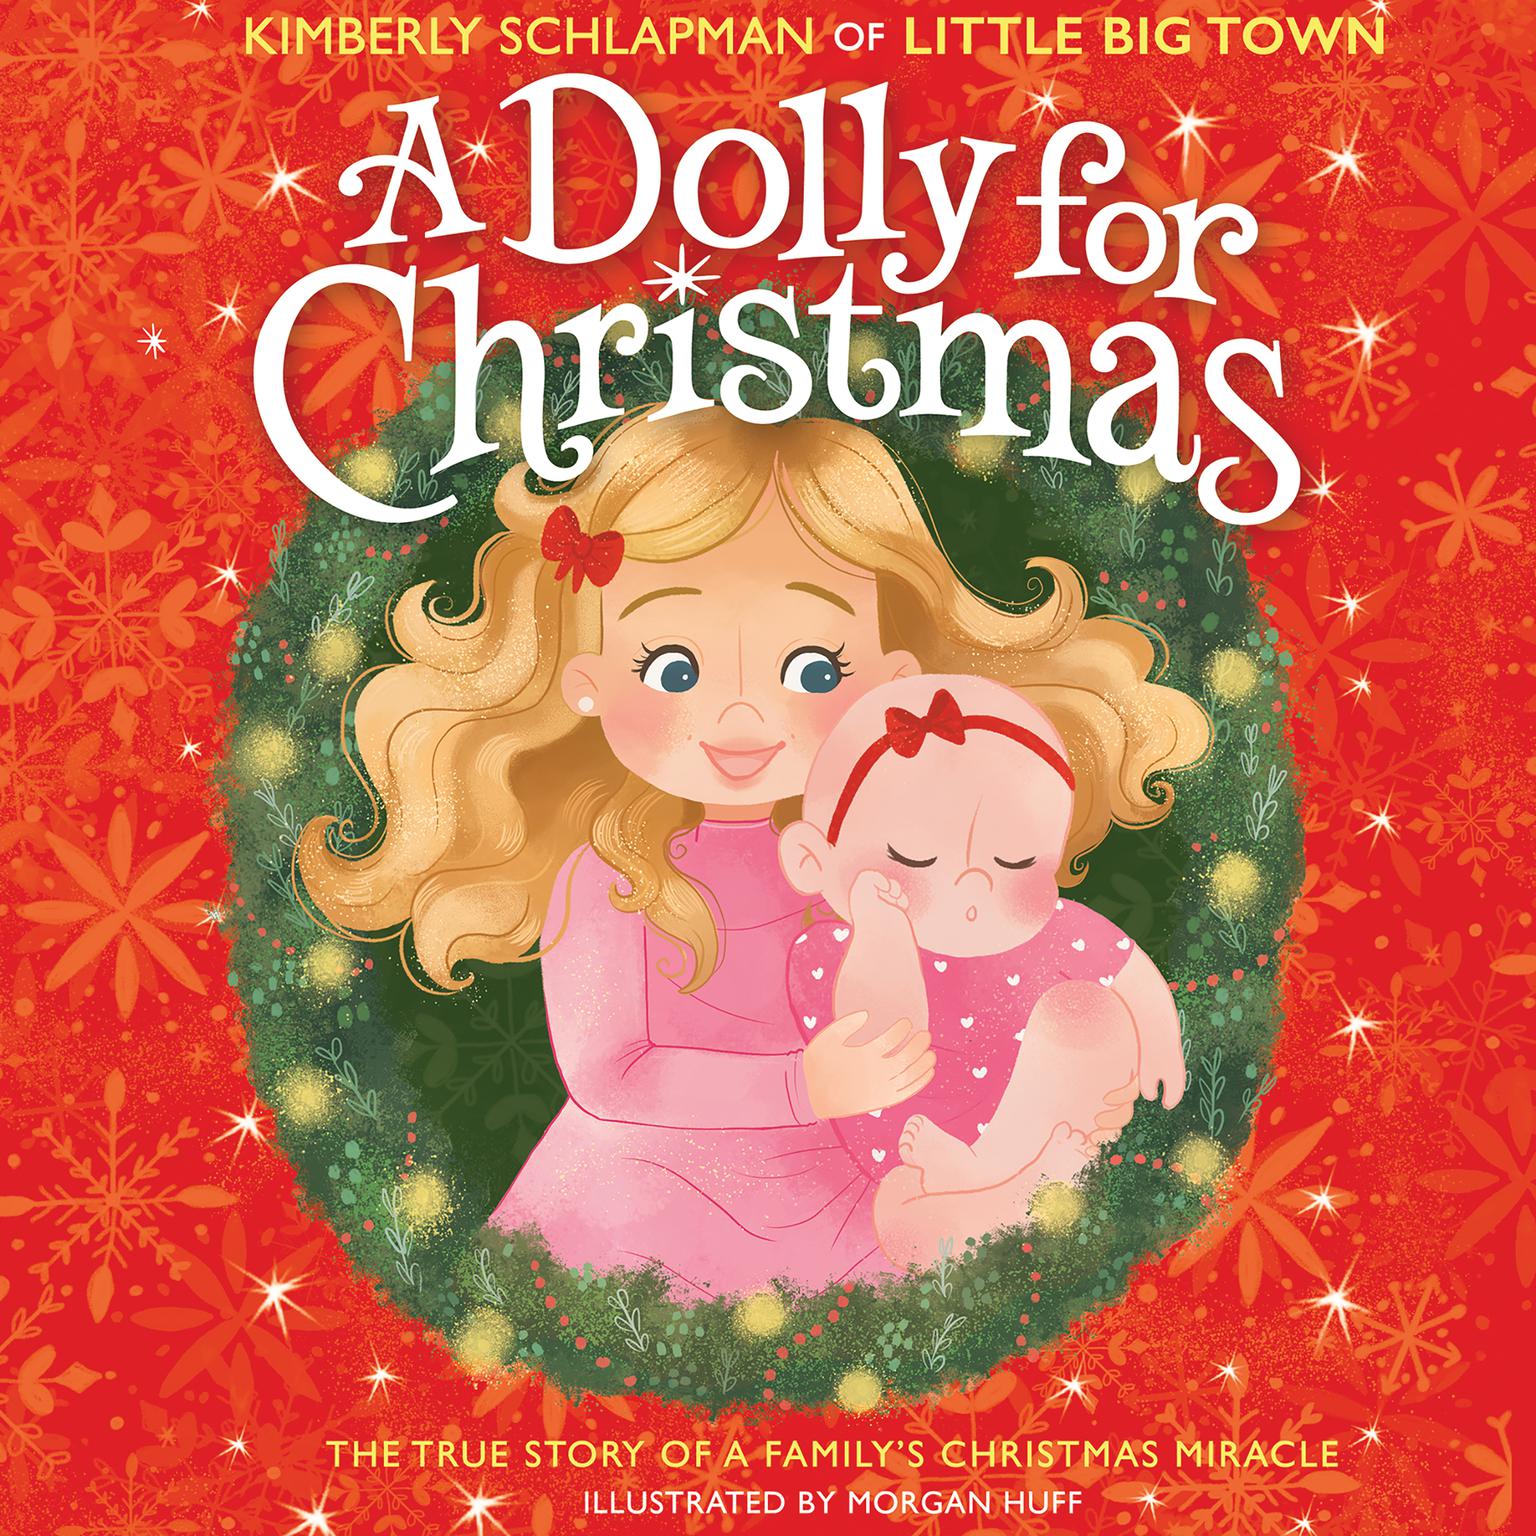 A Dolly for Christmas: The True Story of a Familys Christmas Miracle Audiobook, by Kimberly Schlapman